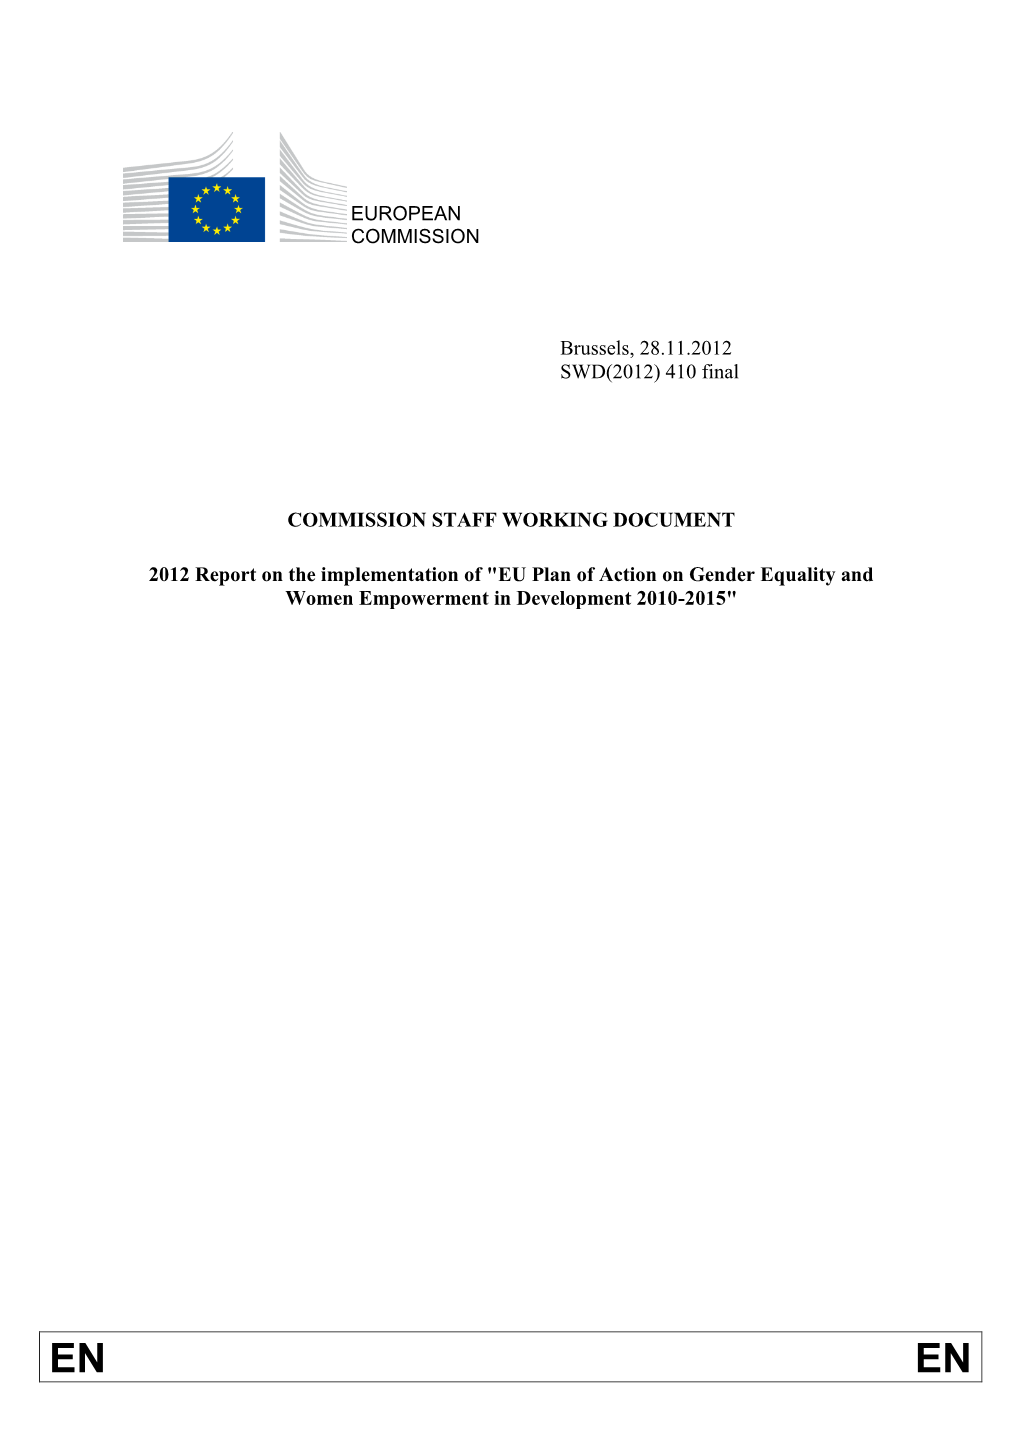 Report on the Implementation of the Eu Plan of Action On